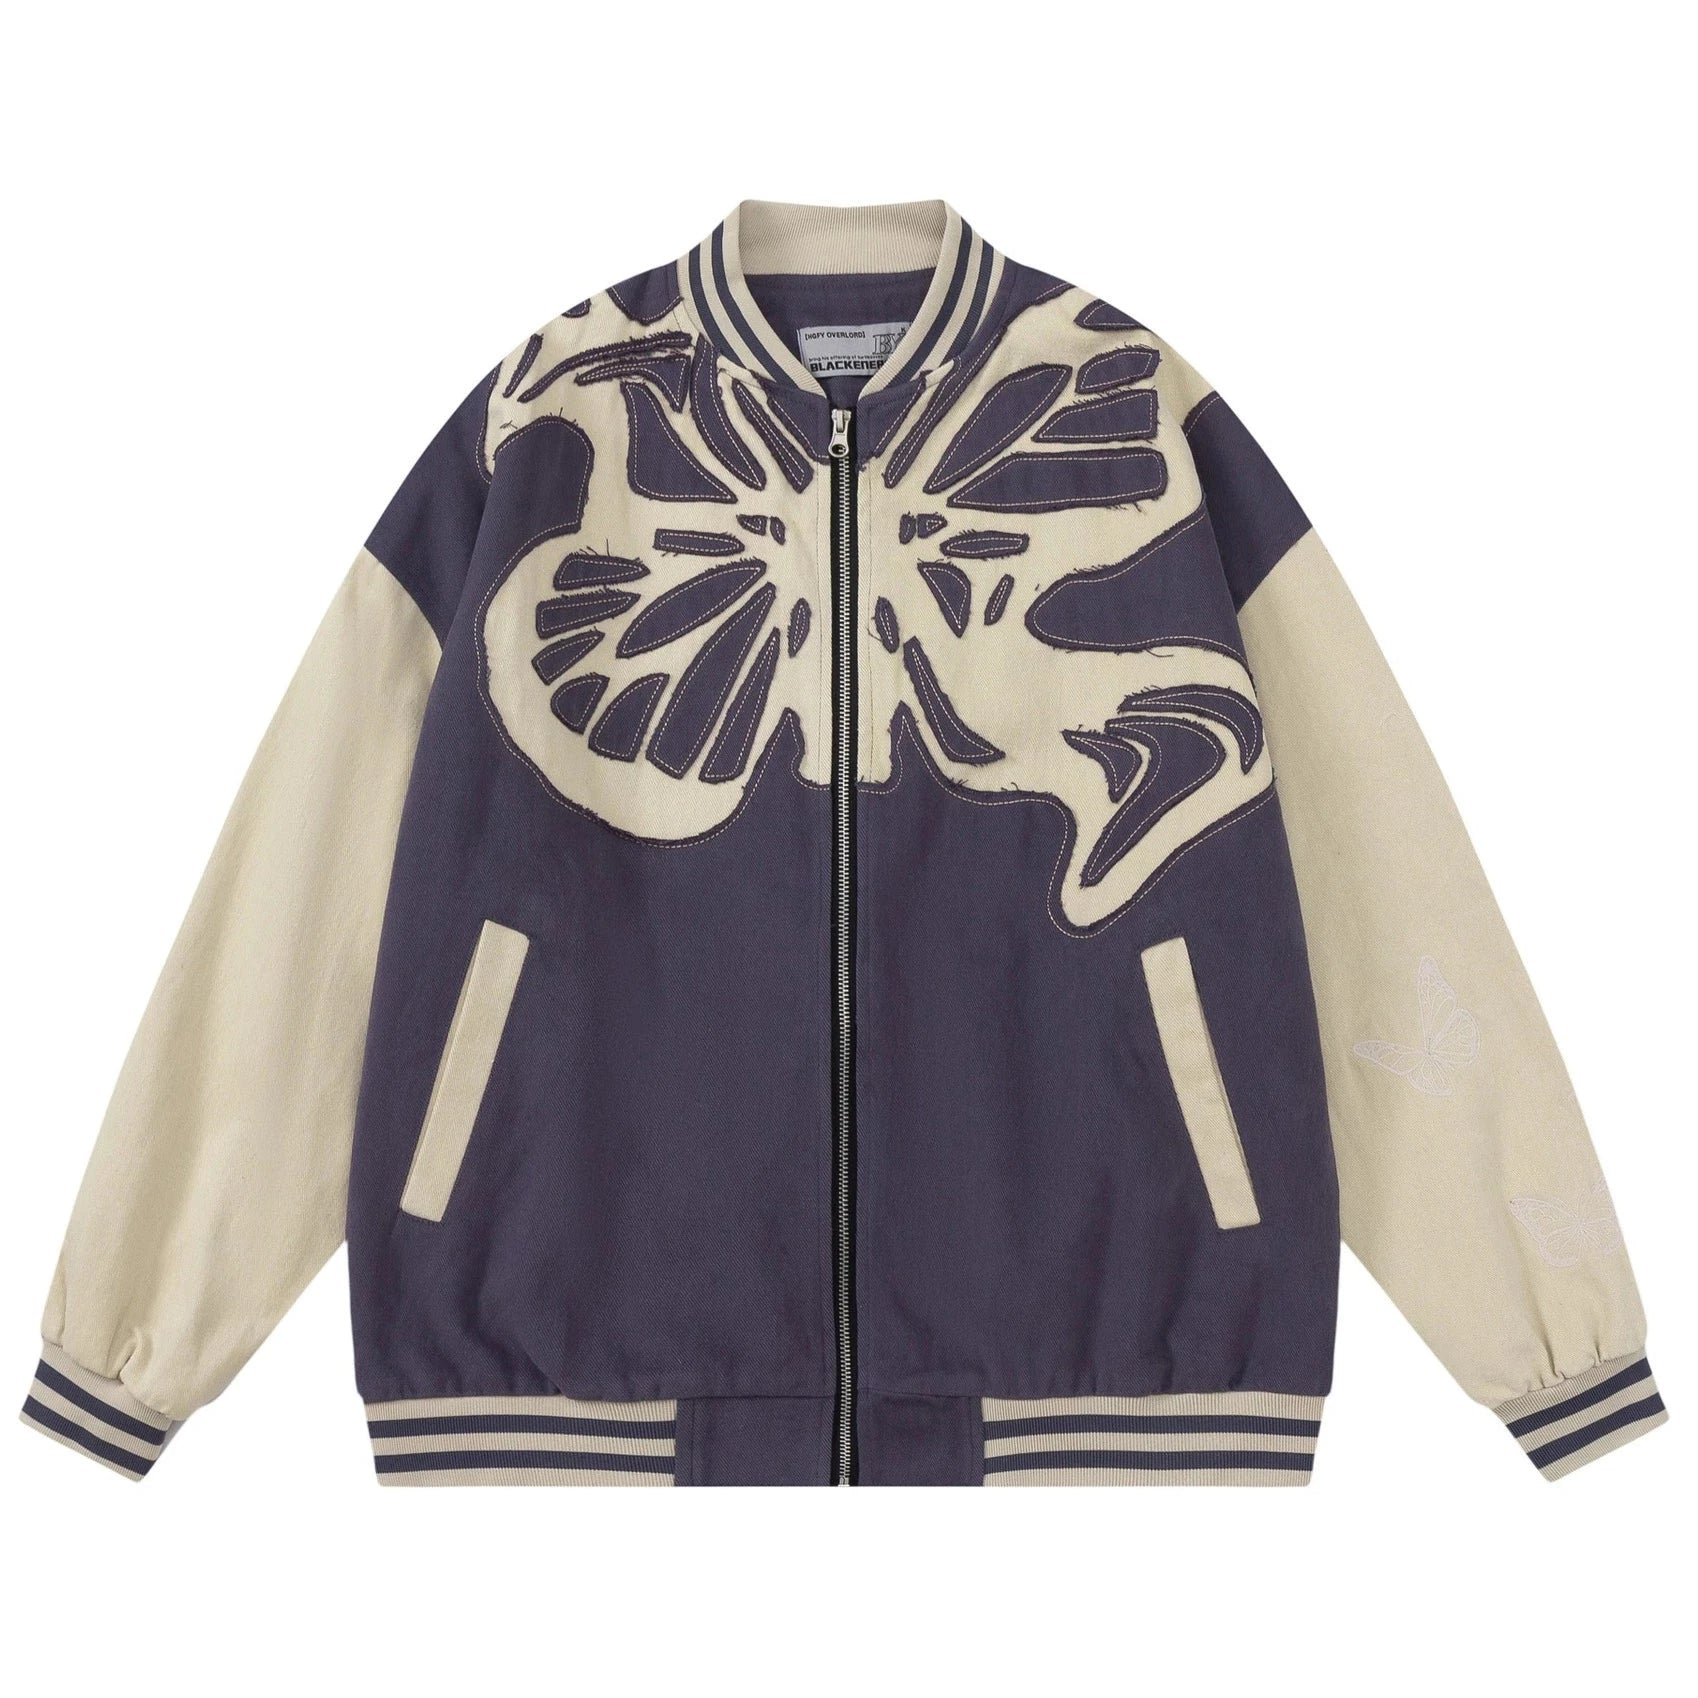 Clout Collection Varsity Jacket with Custom Bone Patching